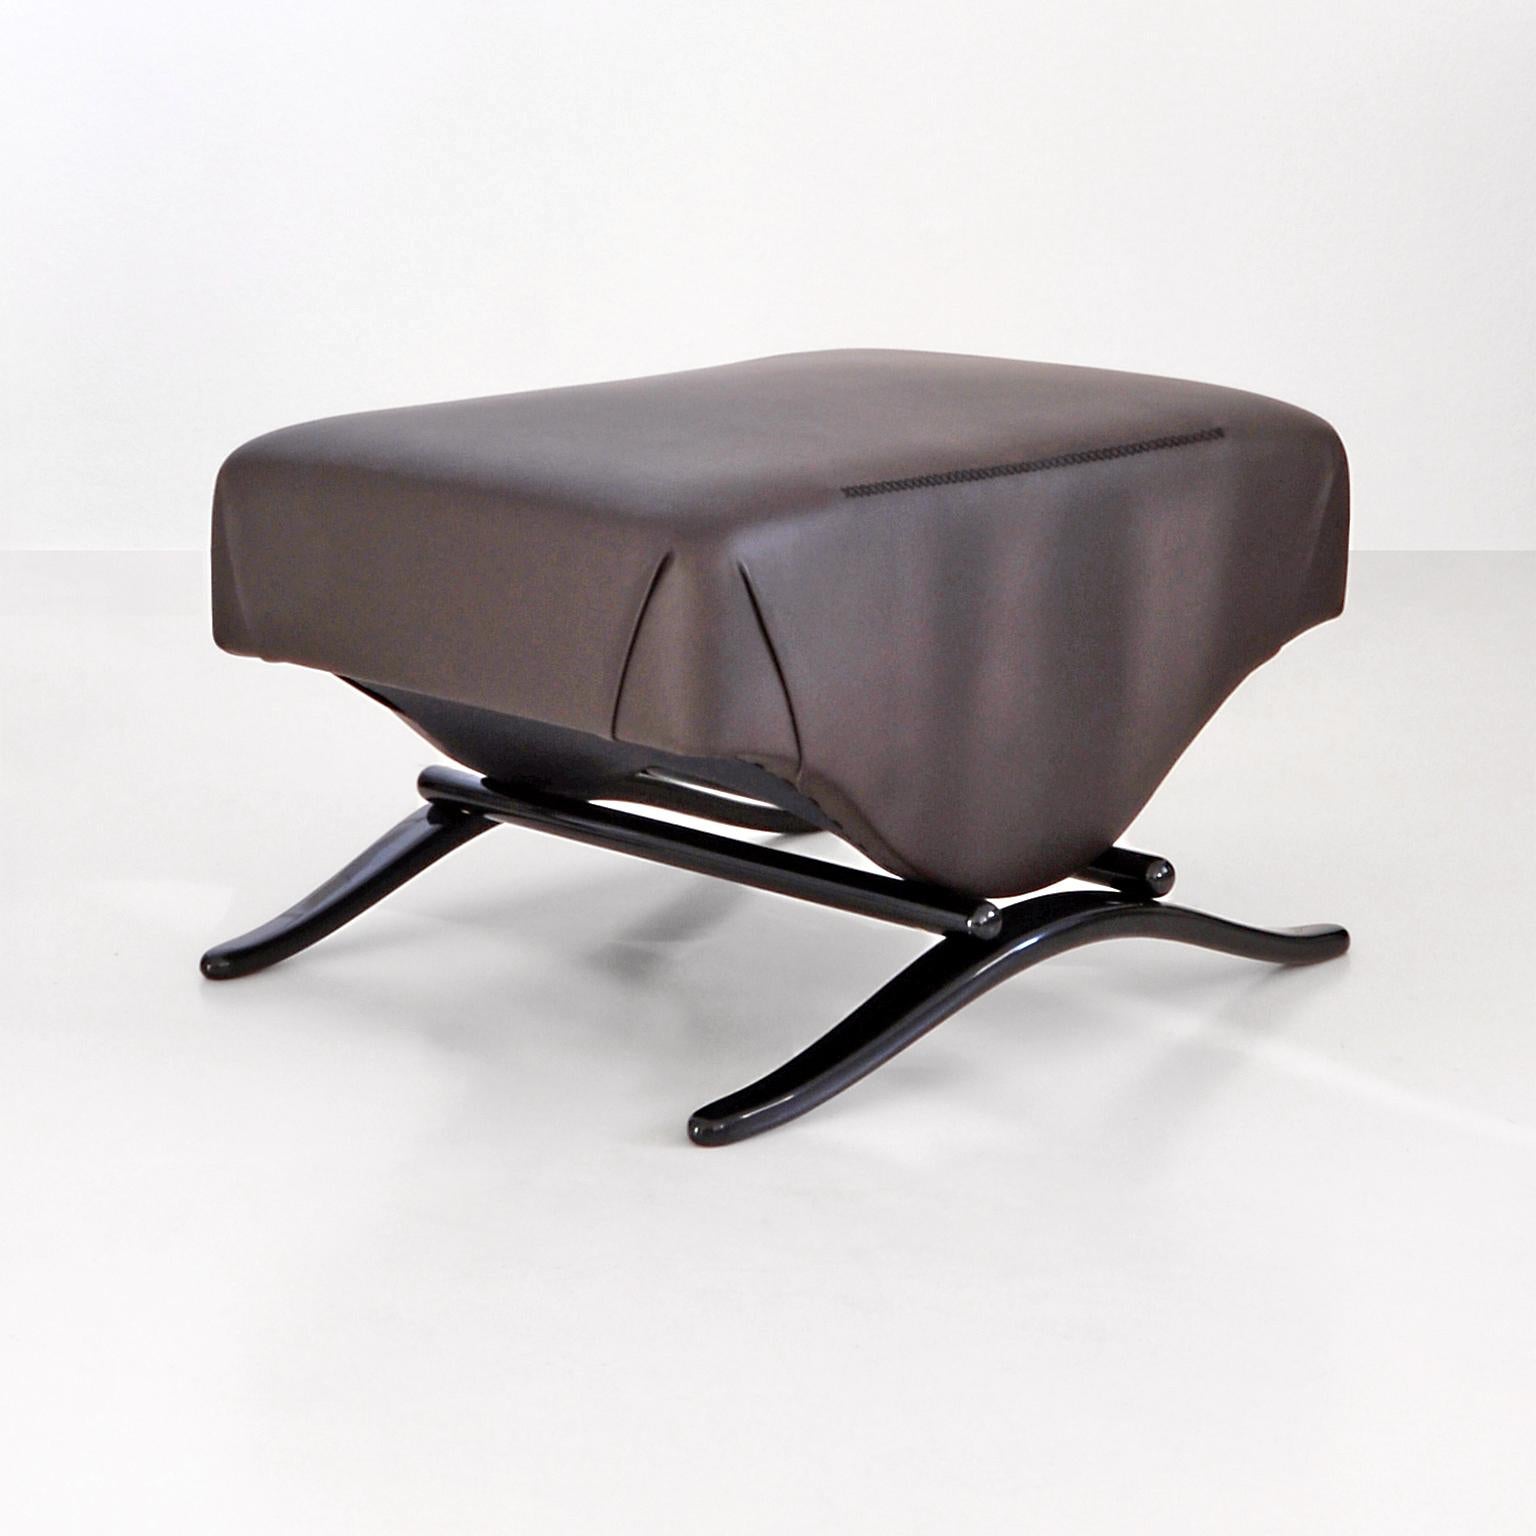 Customizable modernist stool, bet wood, leather upholstery, glossy lacquer.

Individual selection of fabric covers, wood lacquering in various colours and finish available on request in different amounts. Delivery time: 10-12 weeks